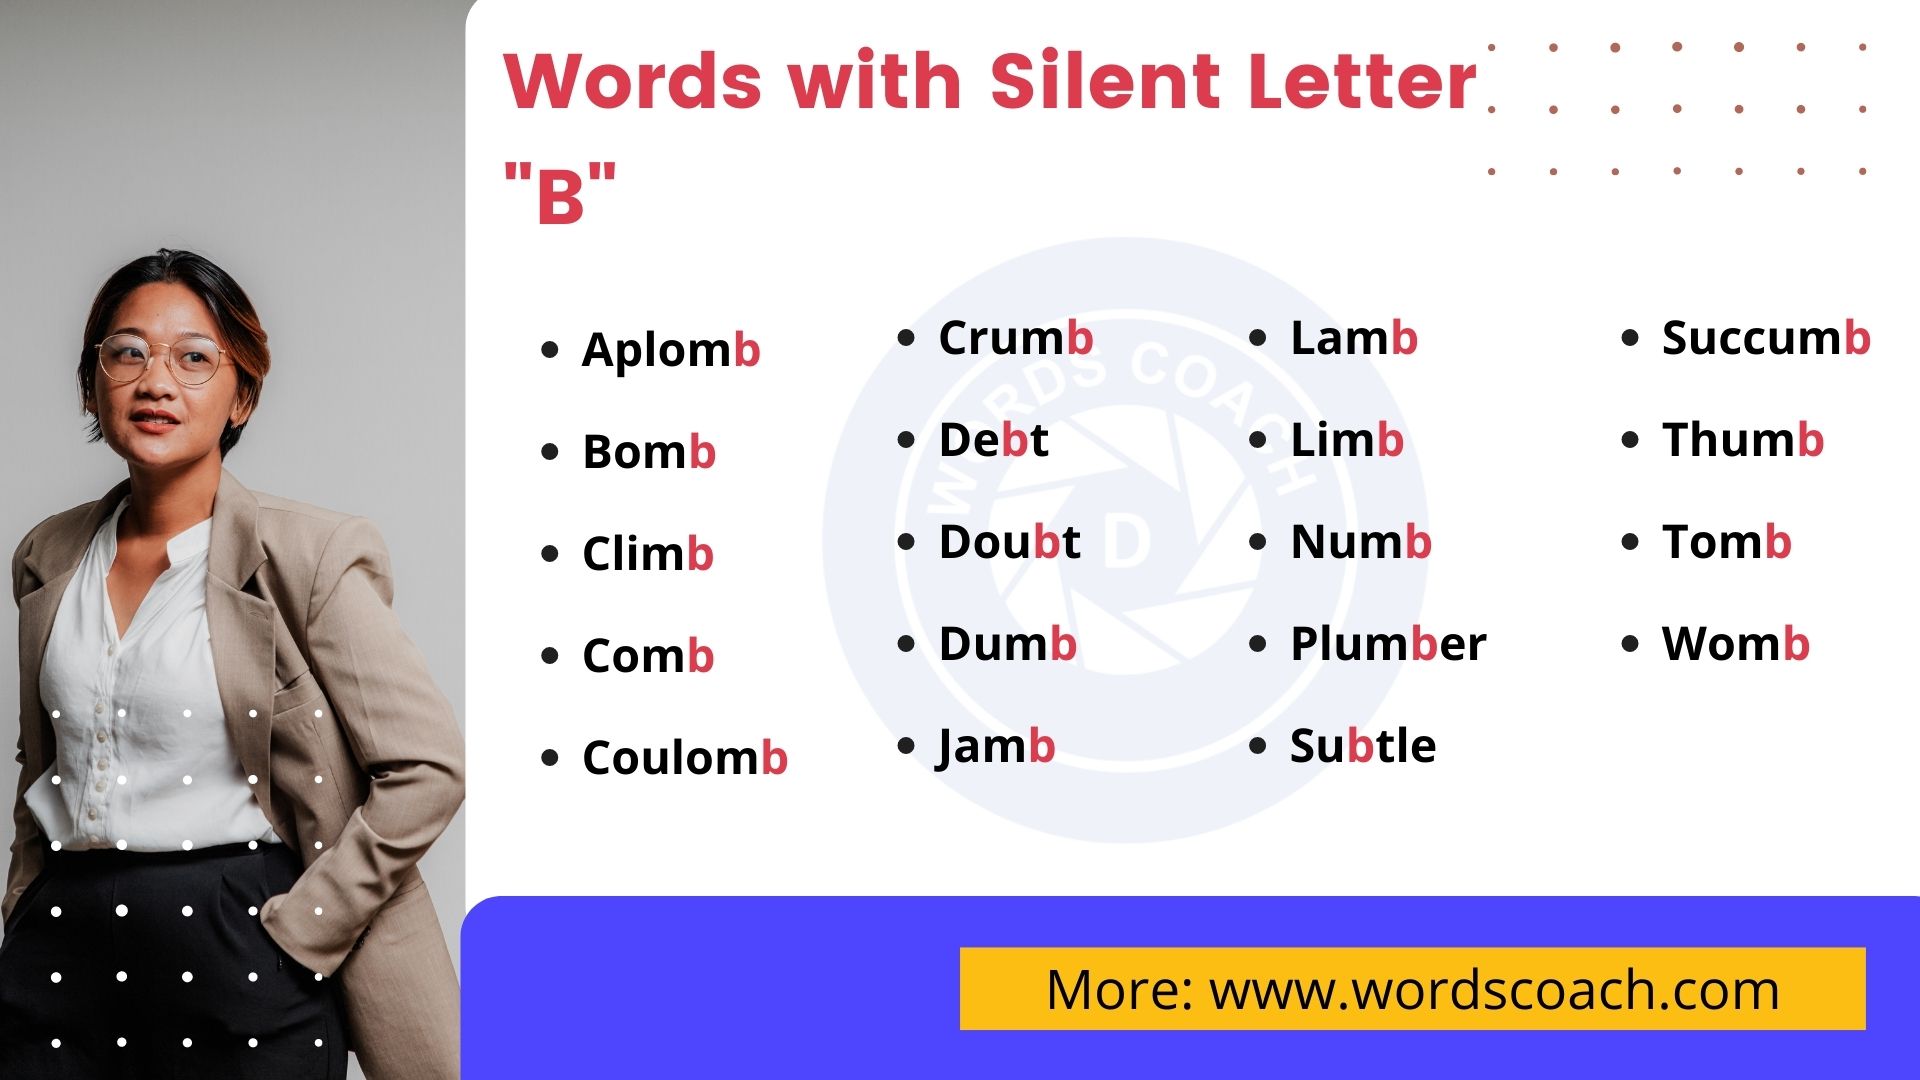 Words with Silent Letter B - wordscoach.com